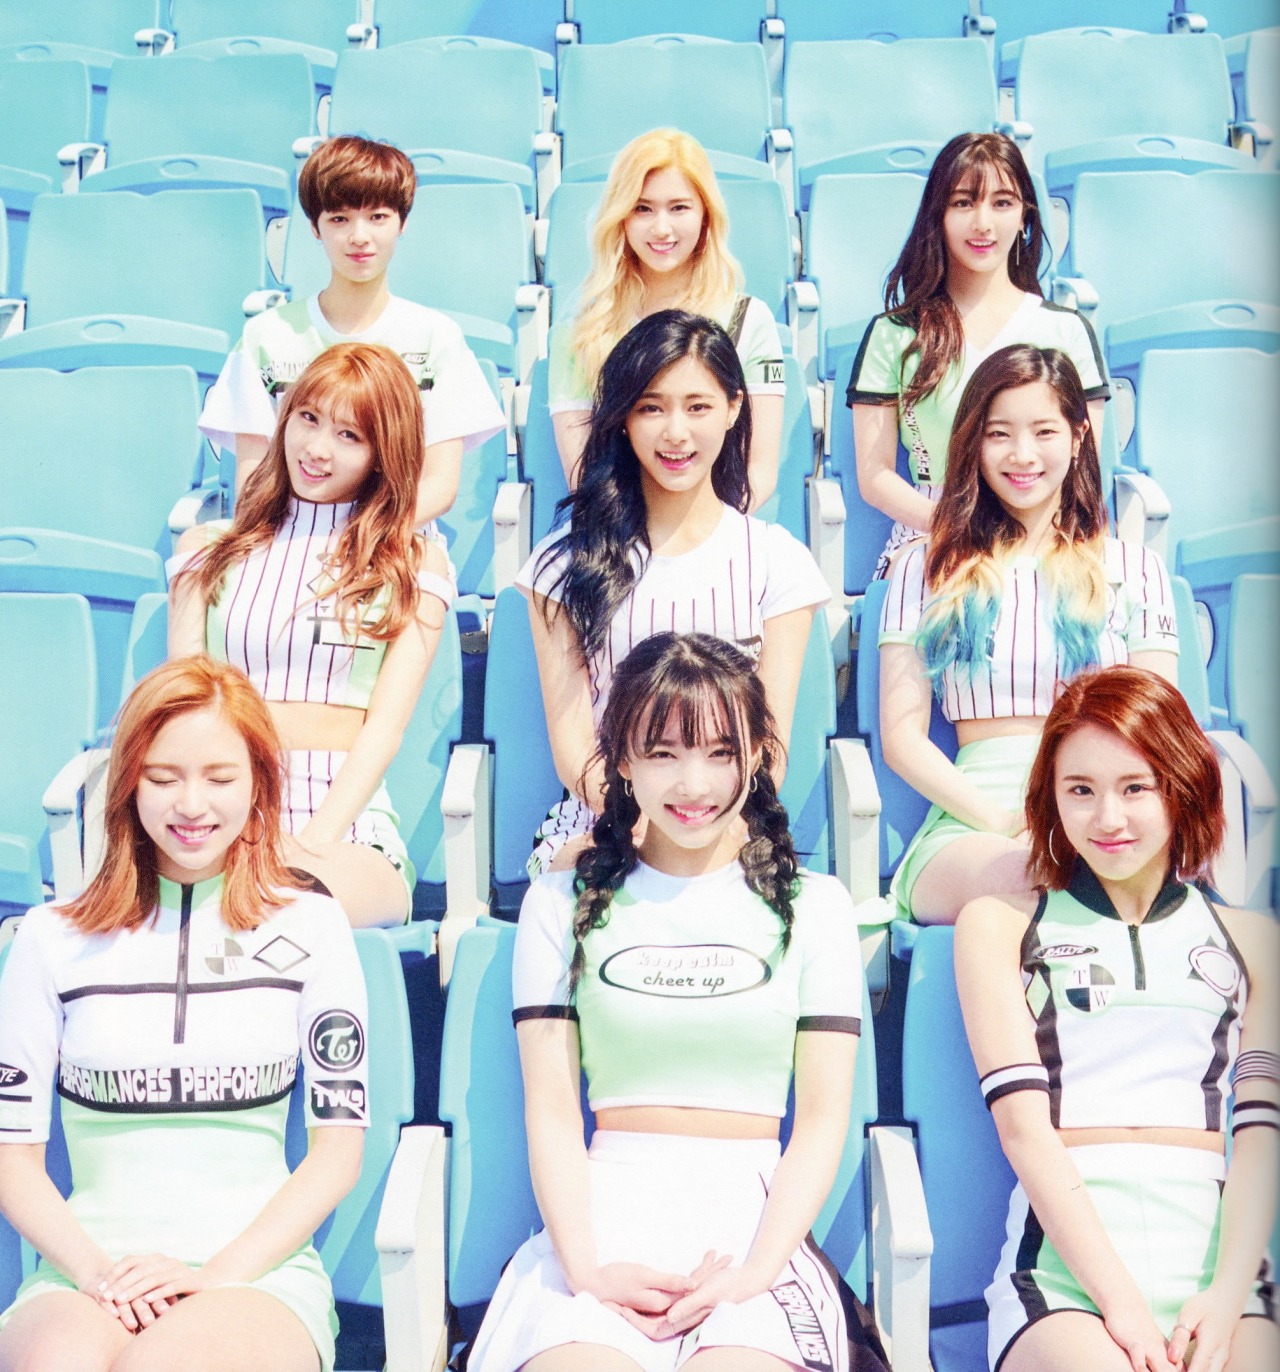 Twice Cheer Up Album Cover Twice 2020 This blend was described as color pop. twice cheer up album cover twice 2020